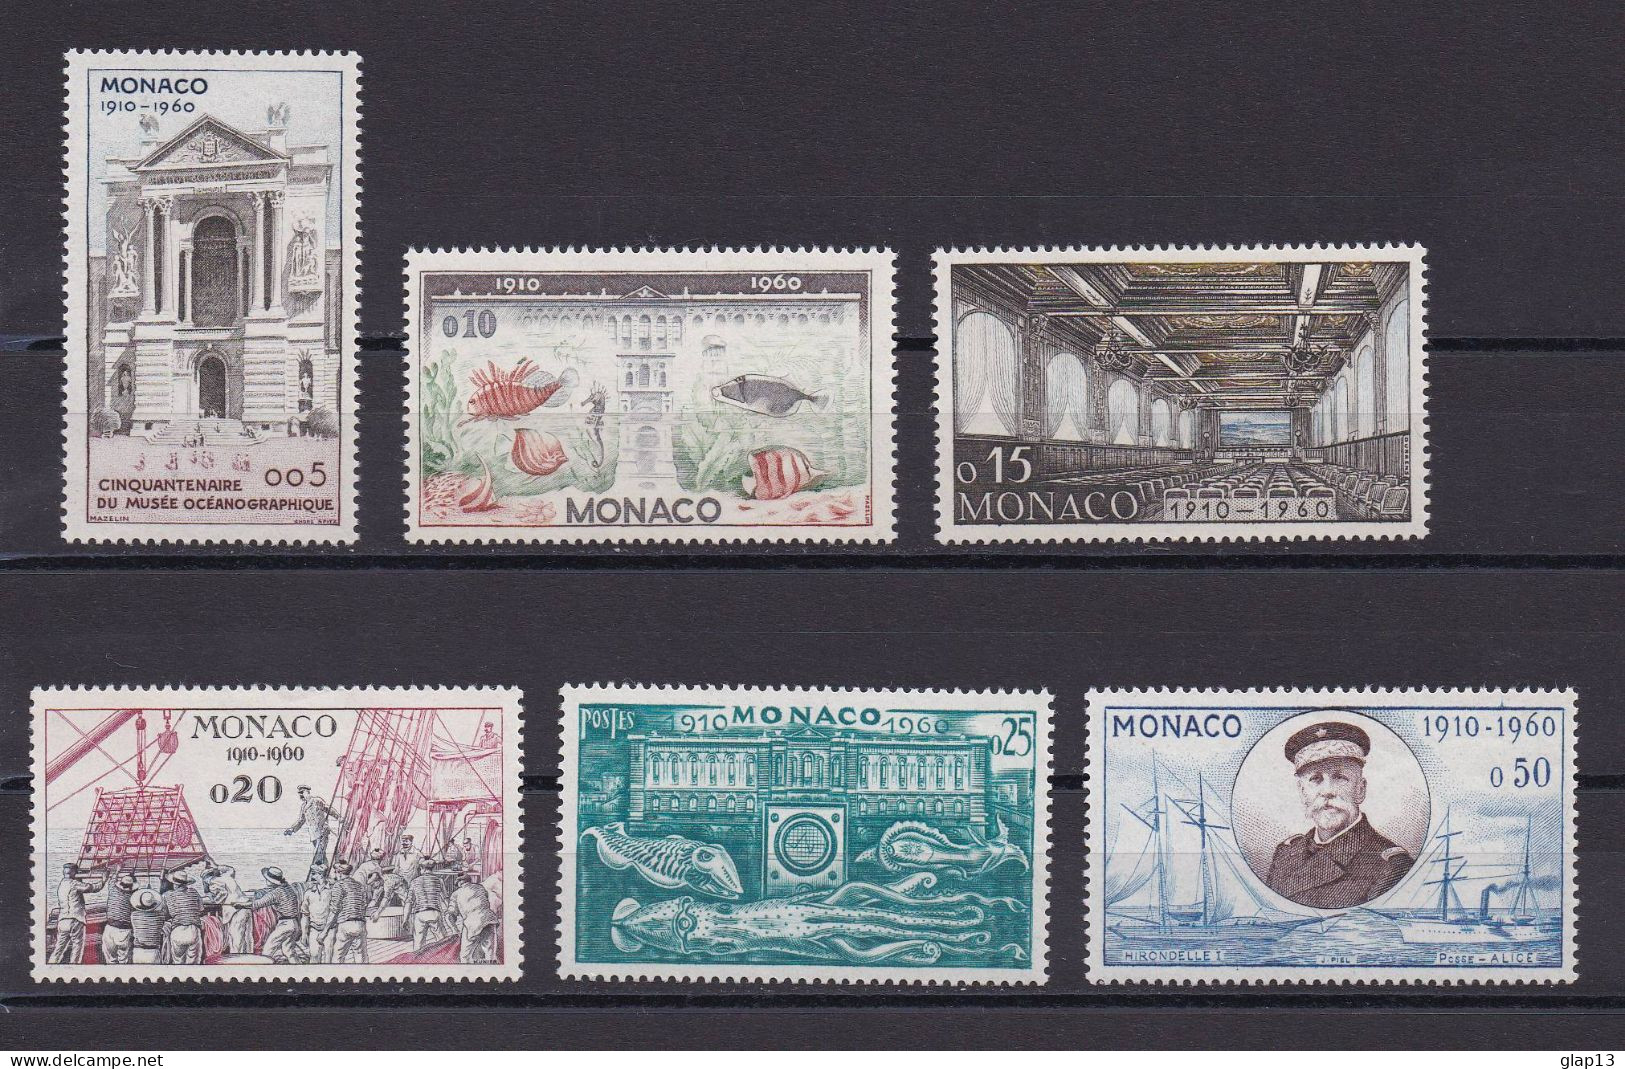 MONACO 1960 TIMBRE N°526/31 NEUF** MUSEE - Unused Stamps